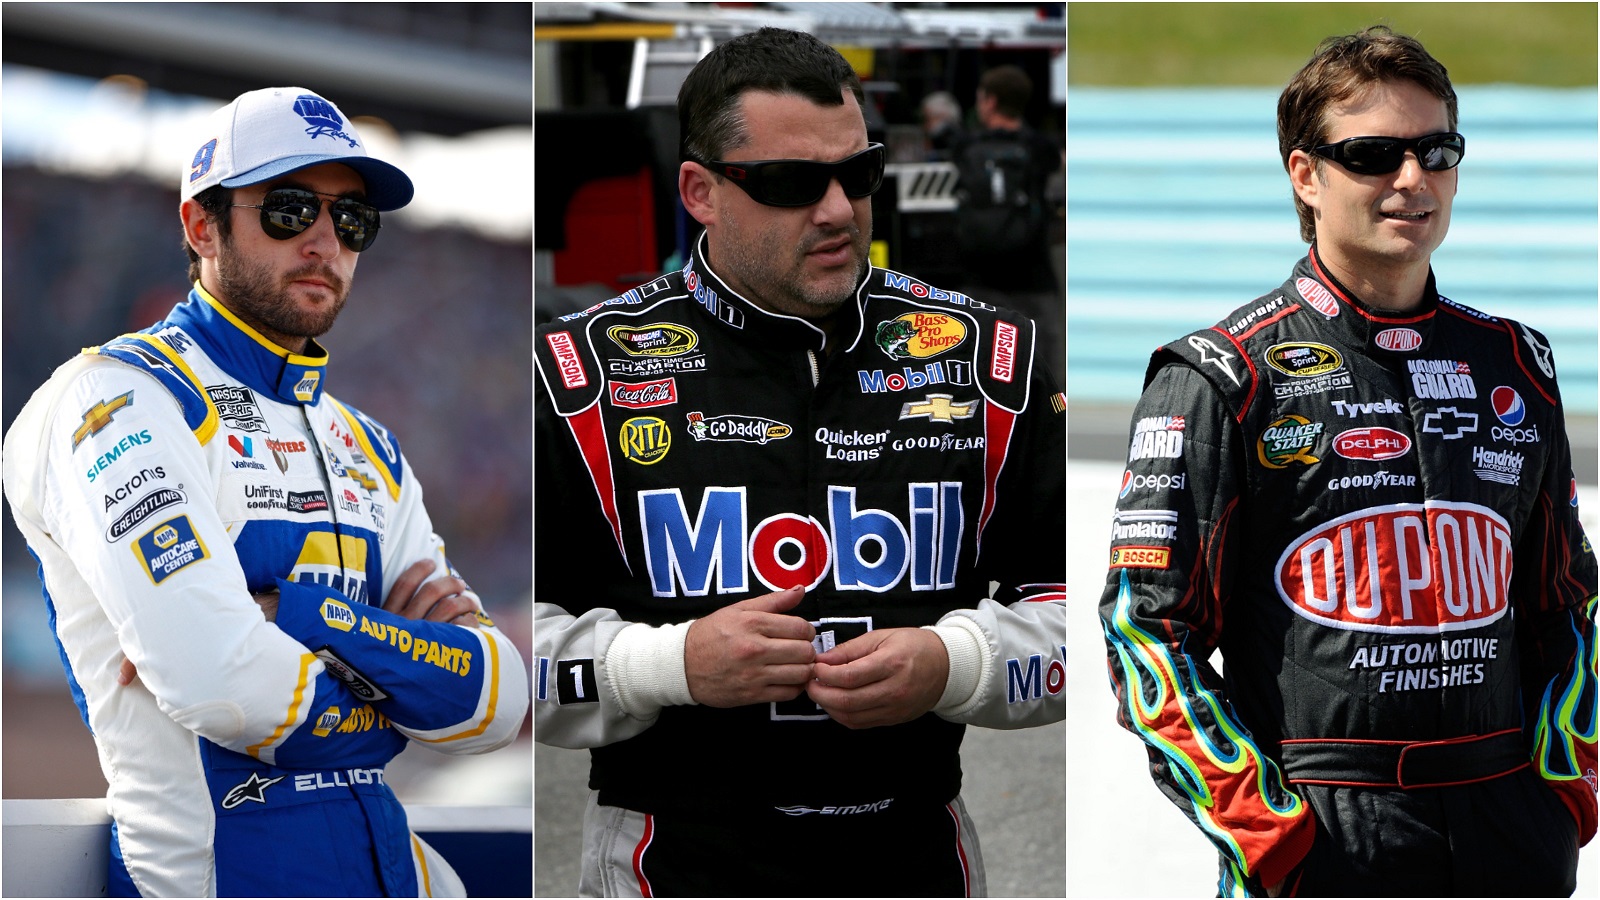 Chase Elliott, Tony Stewart and Jeff Gordon are the most successful road course drivers in NASCAR Cup Series history.